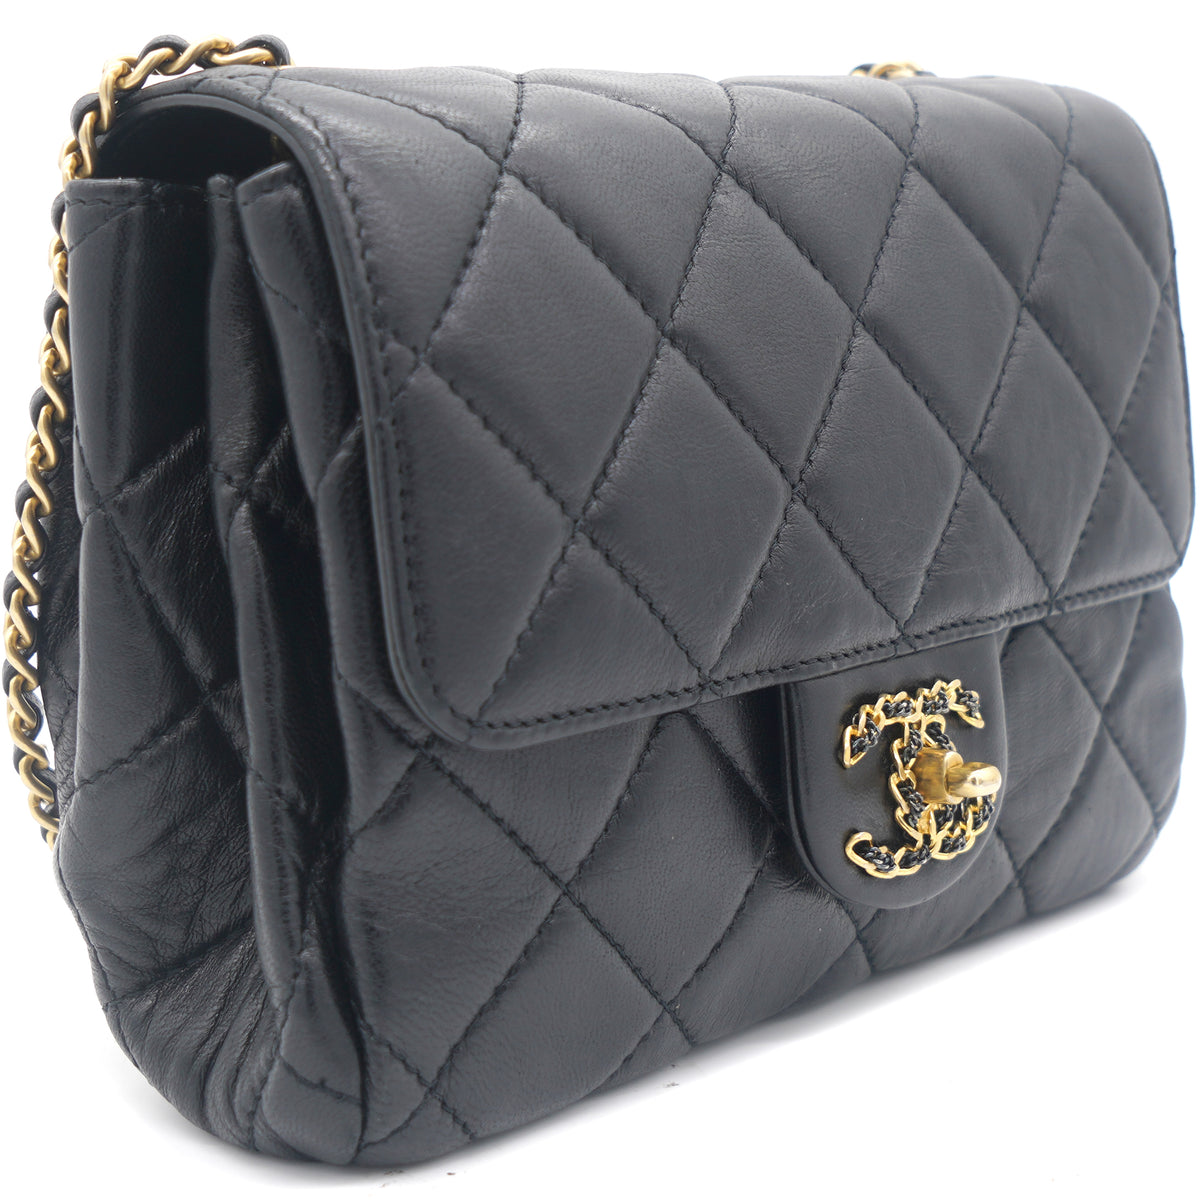 SHOP - CHANEL - Page 16 - VLuxeStyle